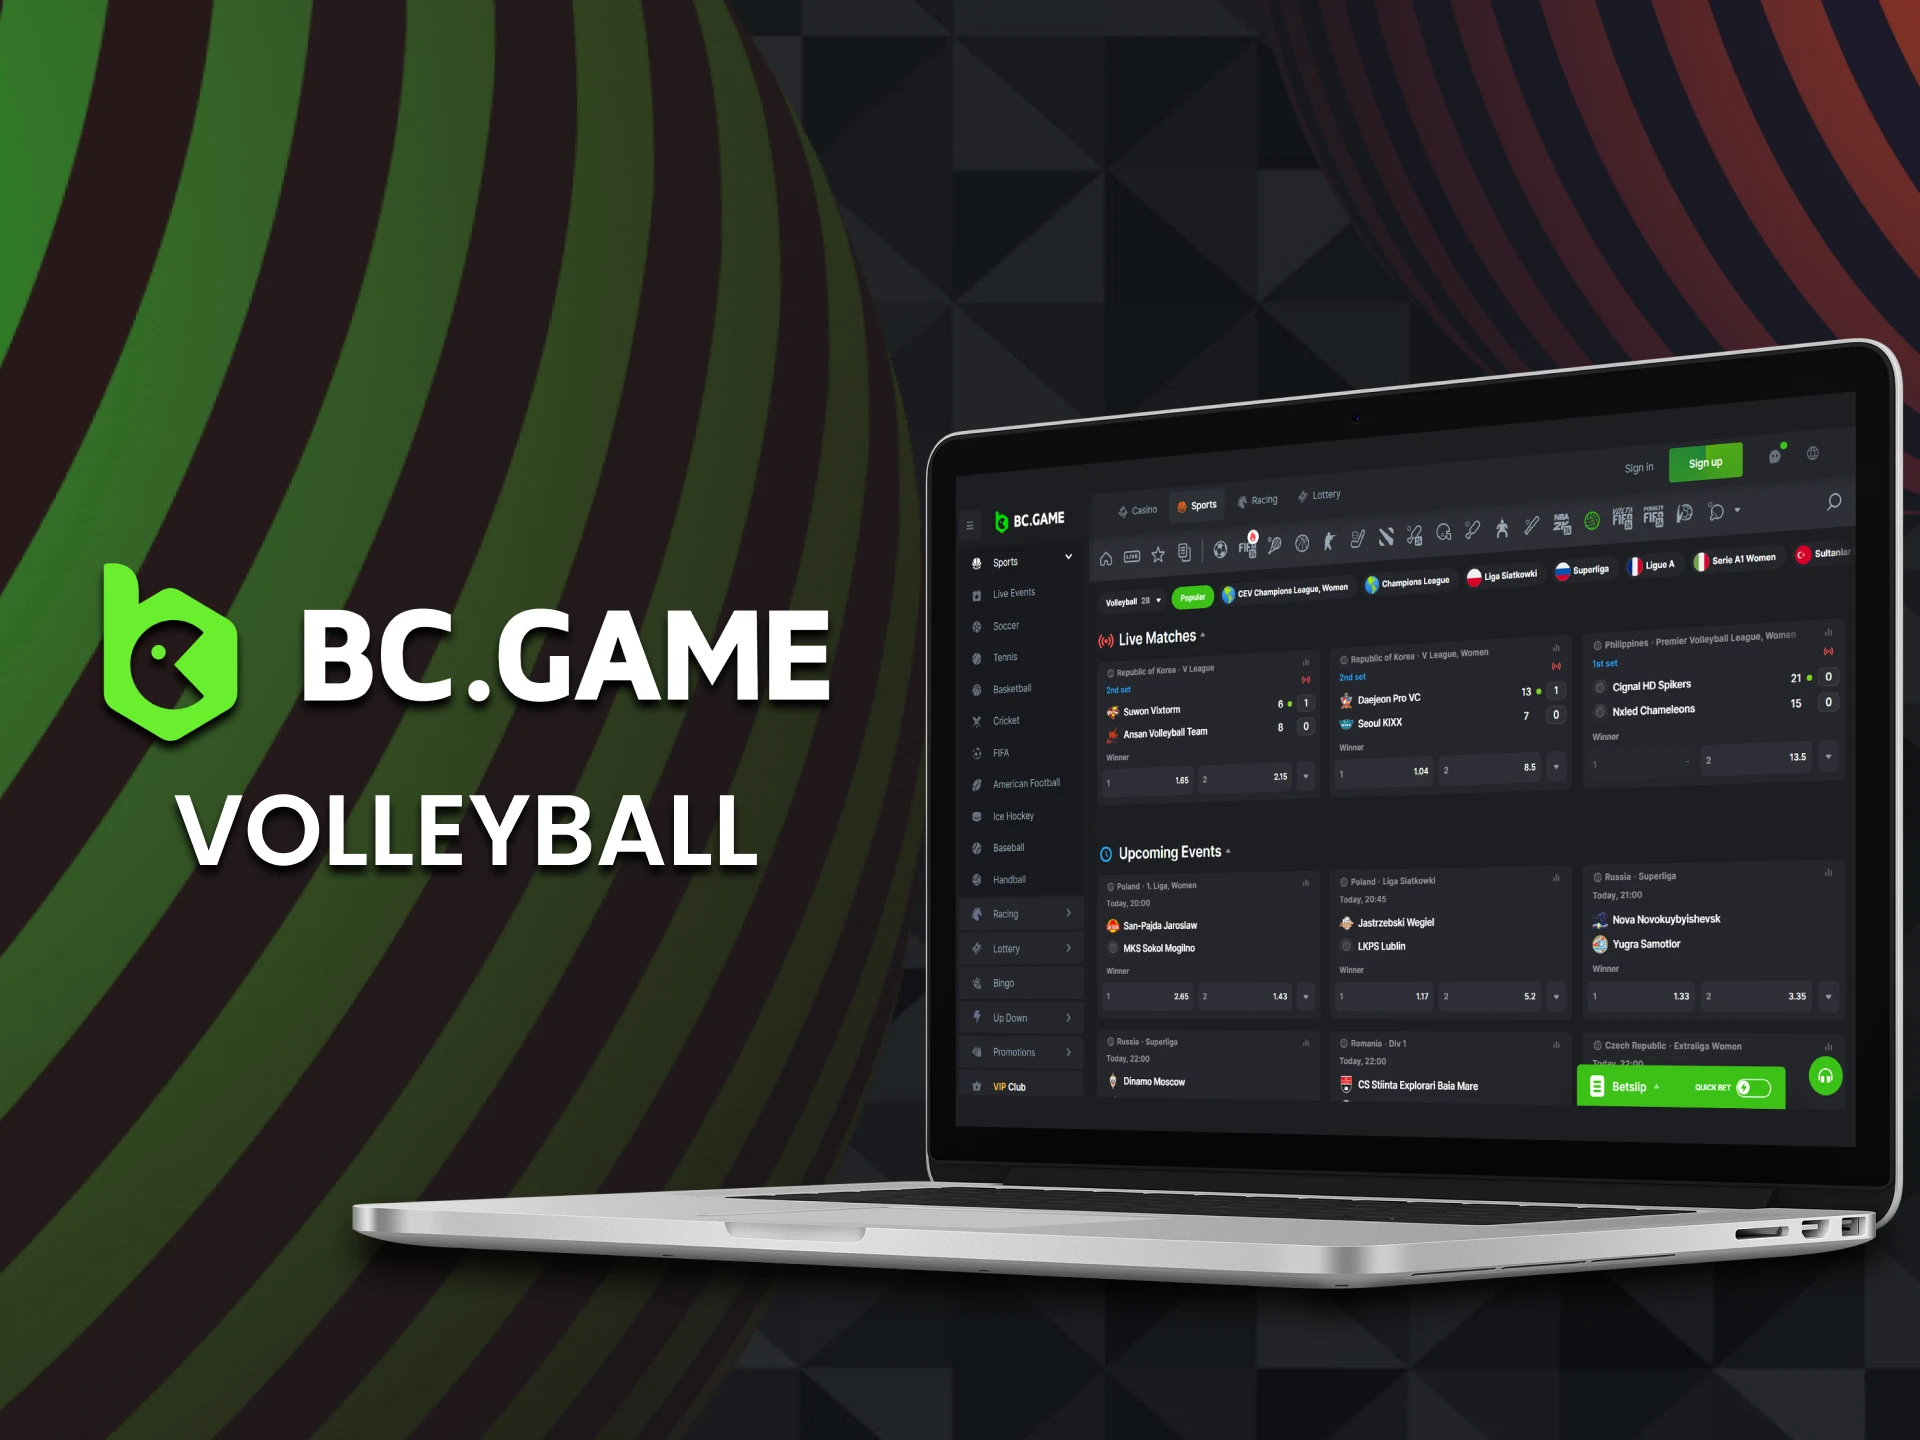 When betting on BC Game, try to bet on volleyball.